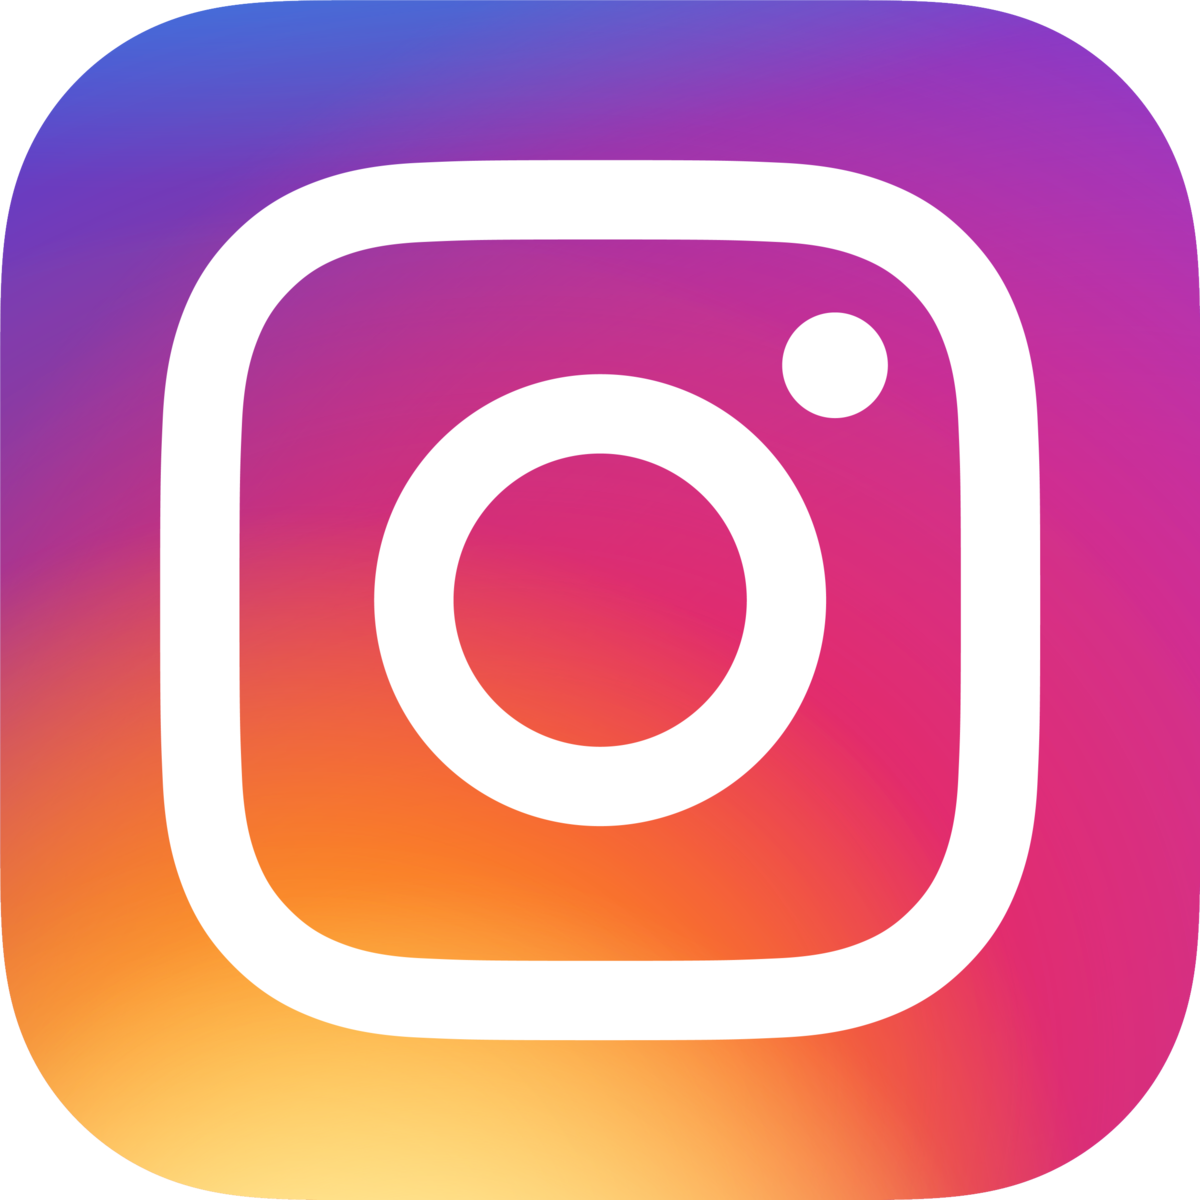 click here for library instagram page